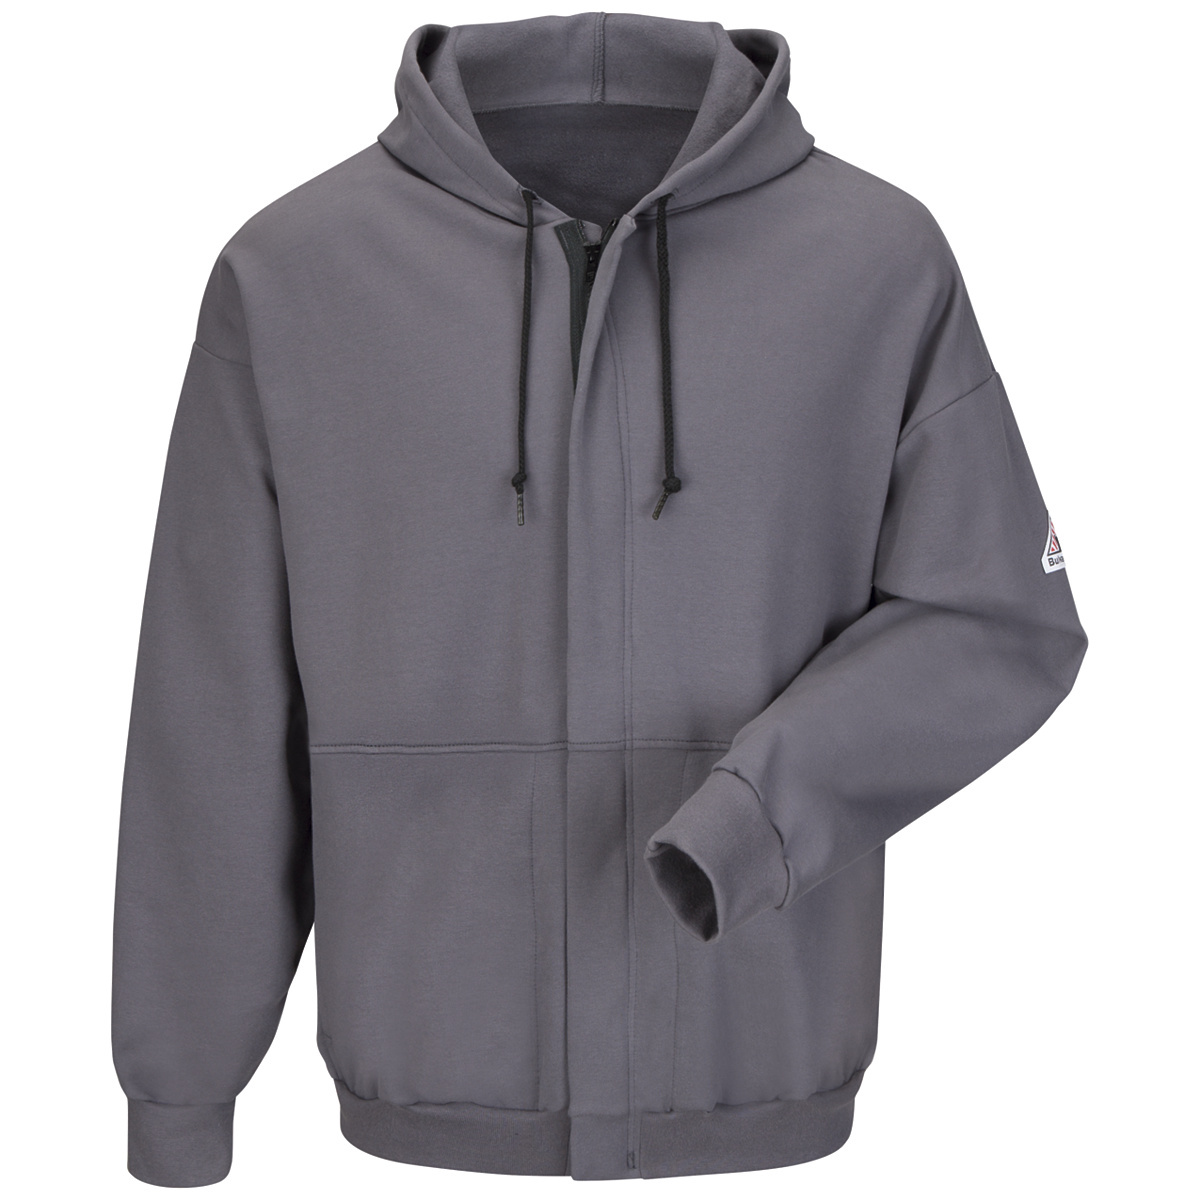 Bulwark® 2X Tall Charcoal Cotton/Spandex Brushed Fleece Flame Resistant Hooded Sweatshirt With Zipper Front Closure